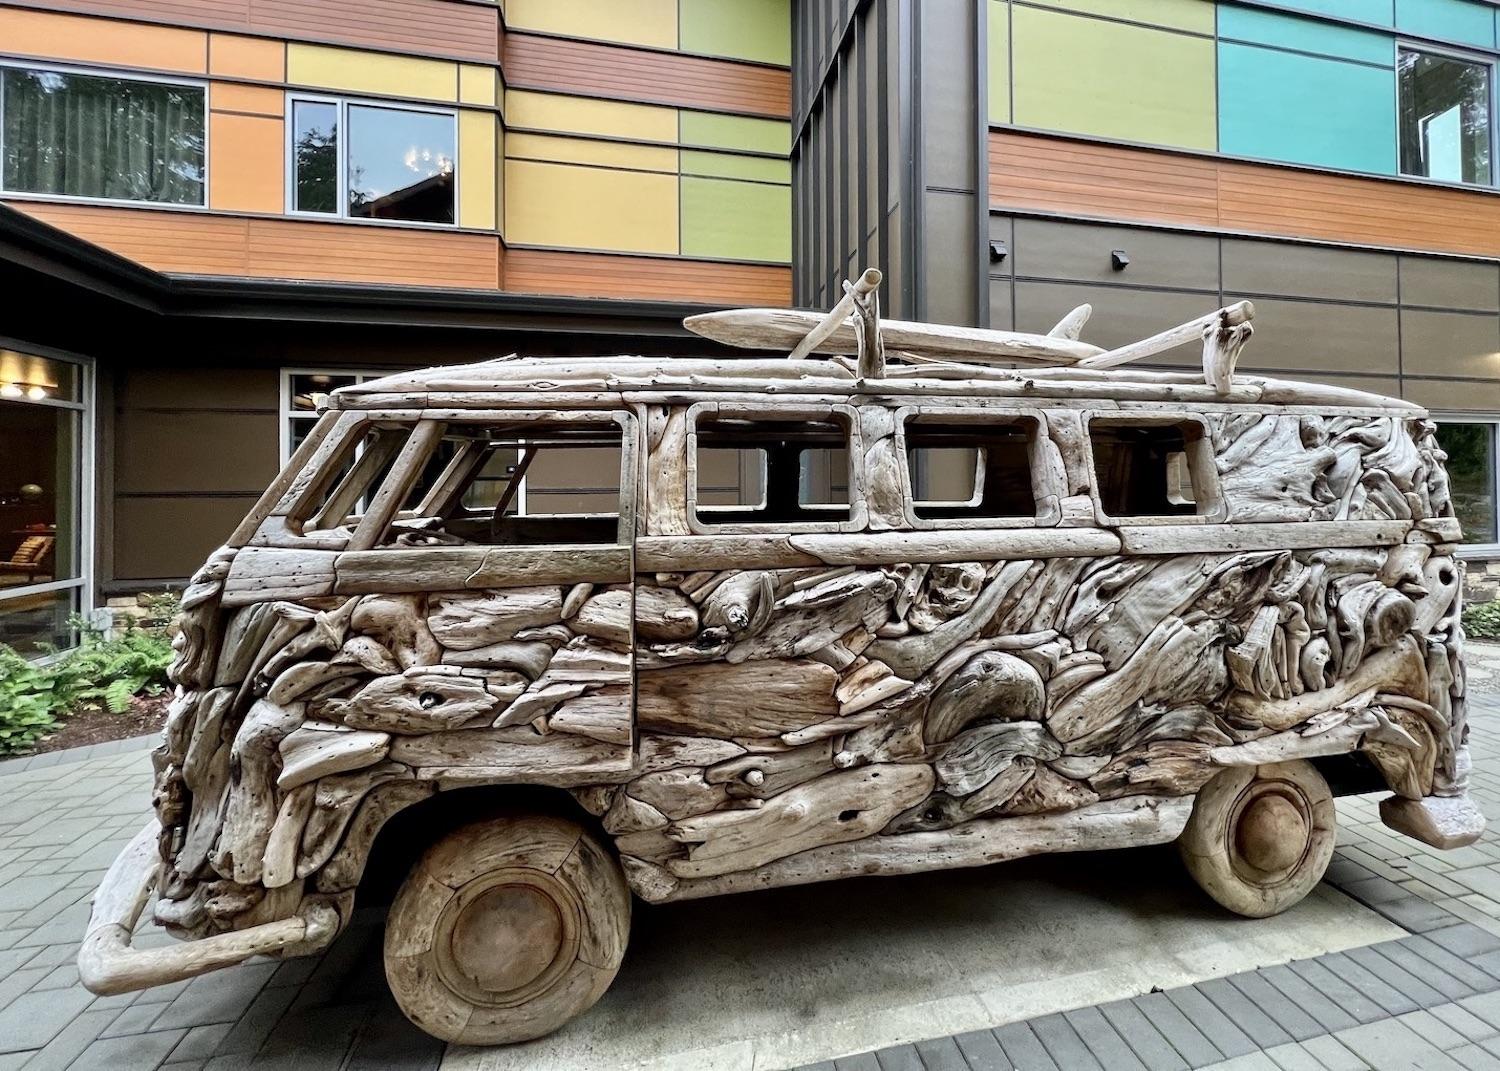 Look for this VW van made of driftwood by Drifted Creations in the courtyard of Hotel Zed in Tofino.